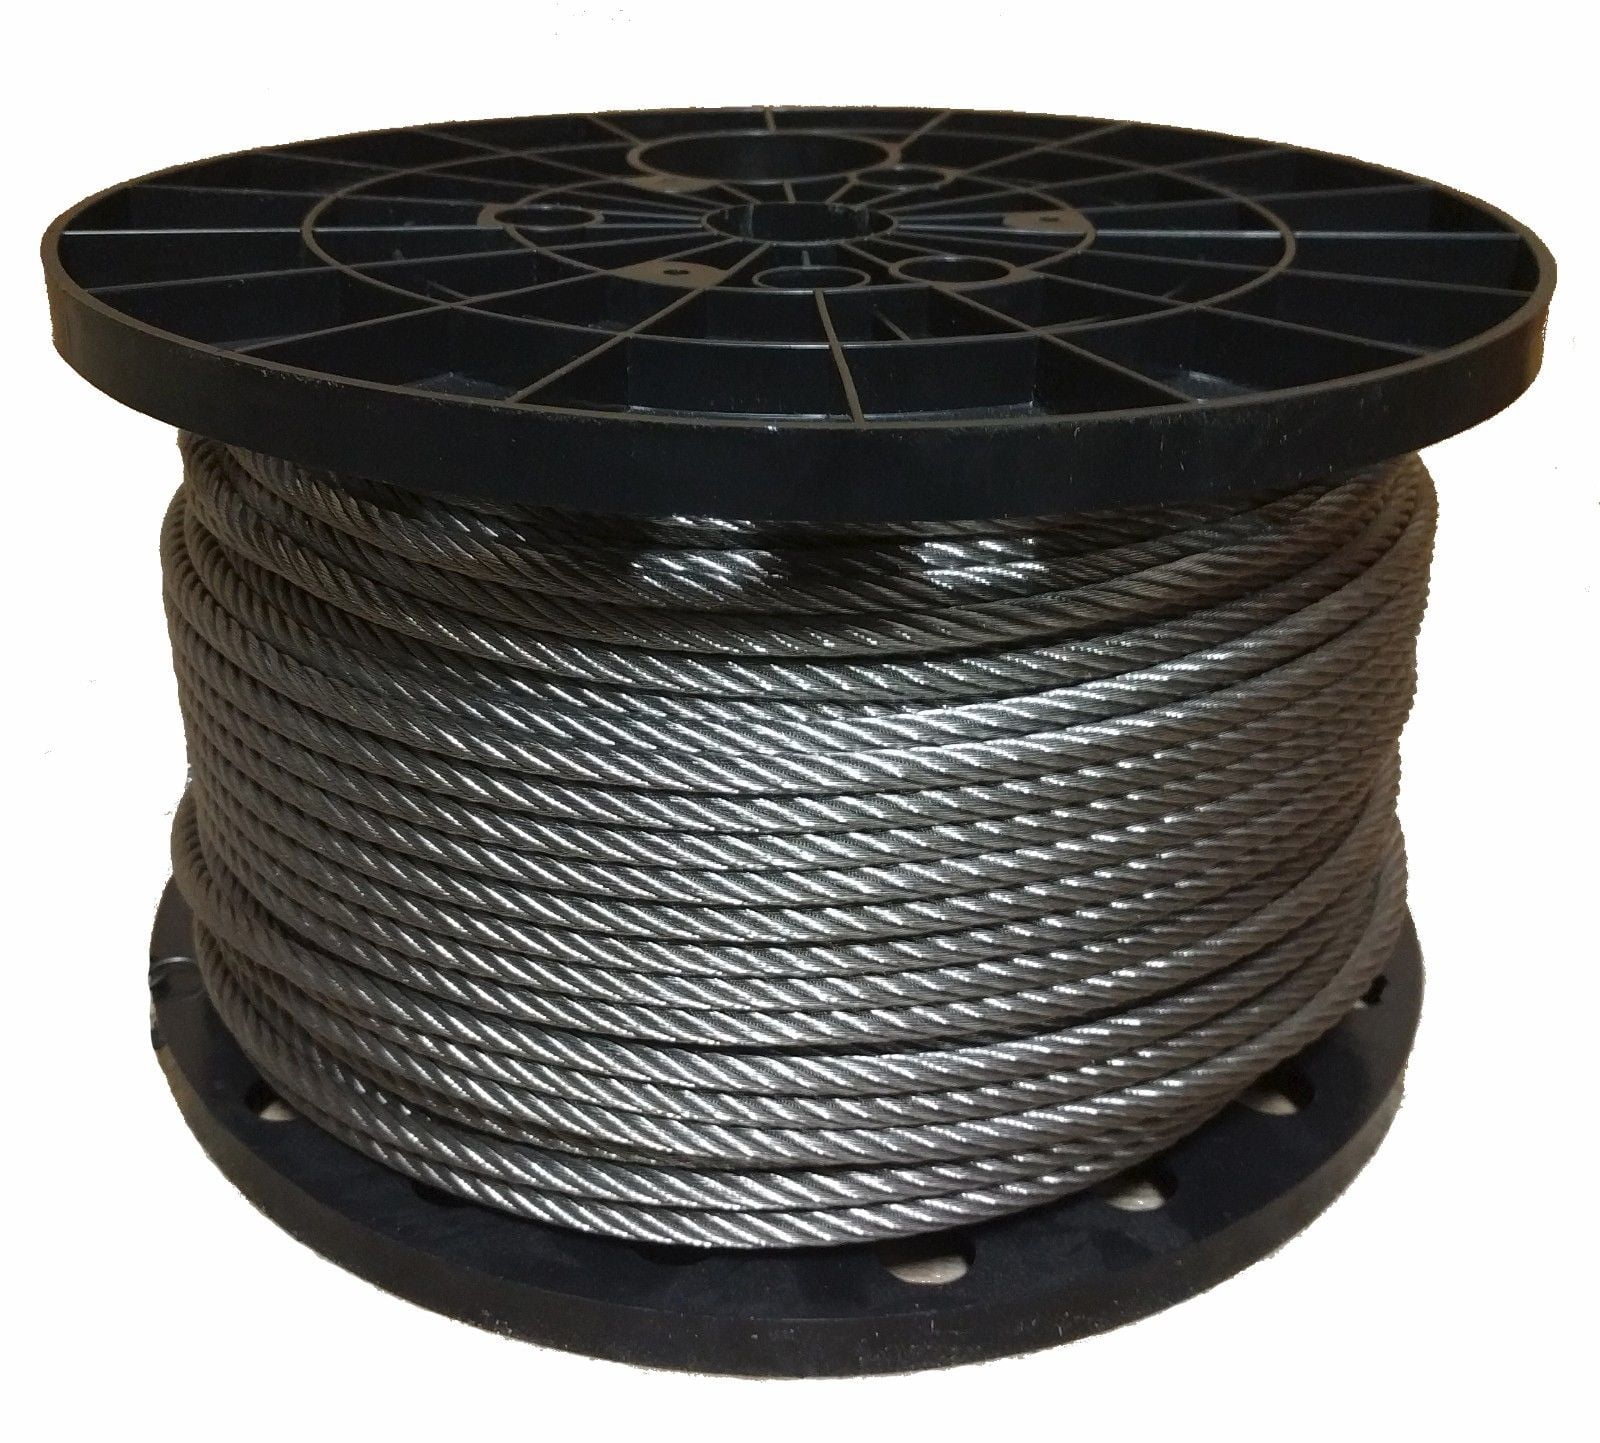 Cable Only 7 Ft Cable Length Black Oxidize Galvanized Steel Wire Rope 1/8” 7X19 Stage Theater Display Cable 